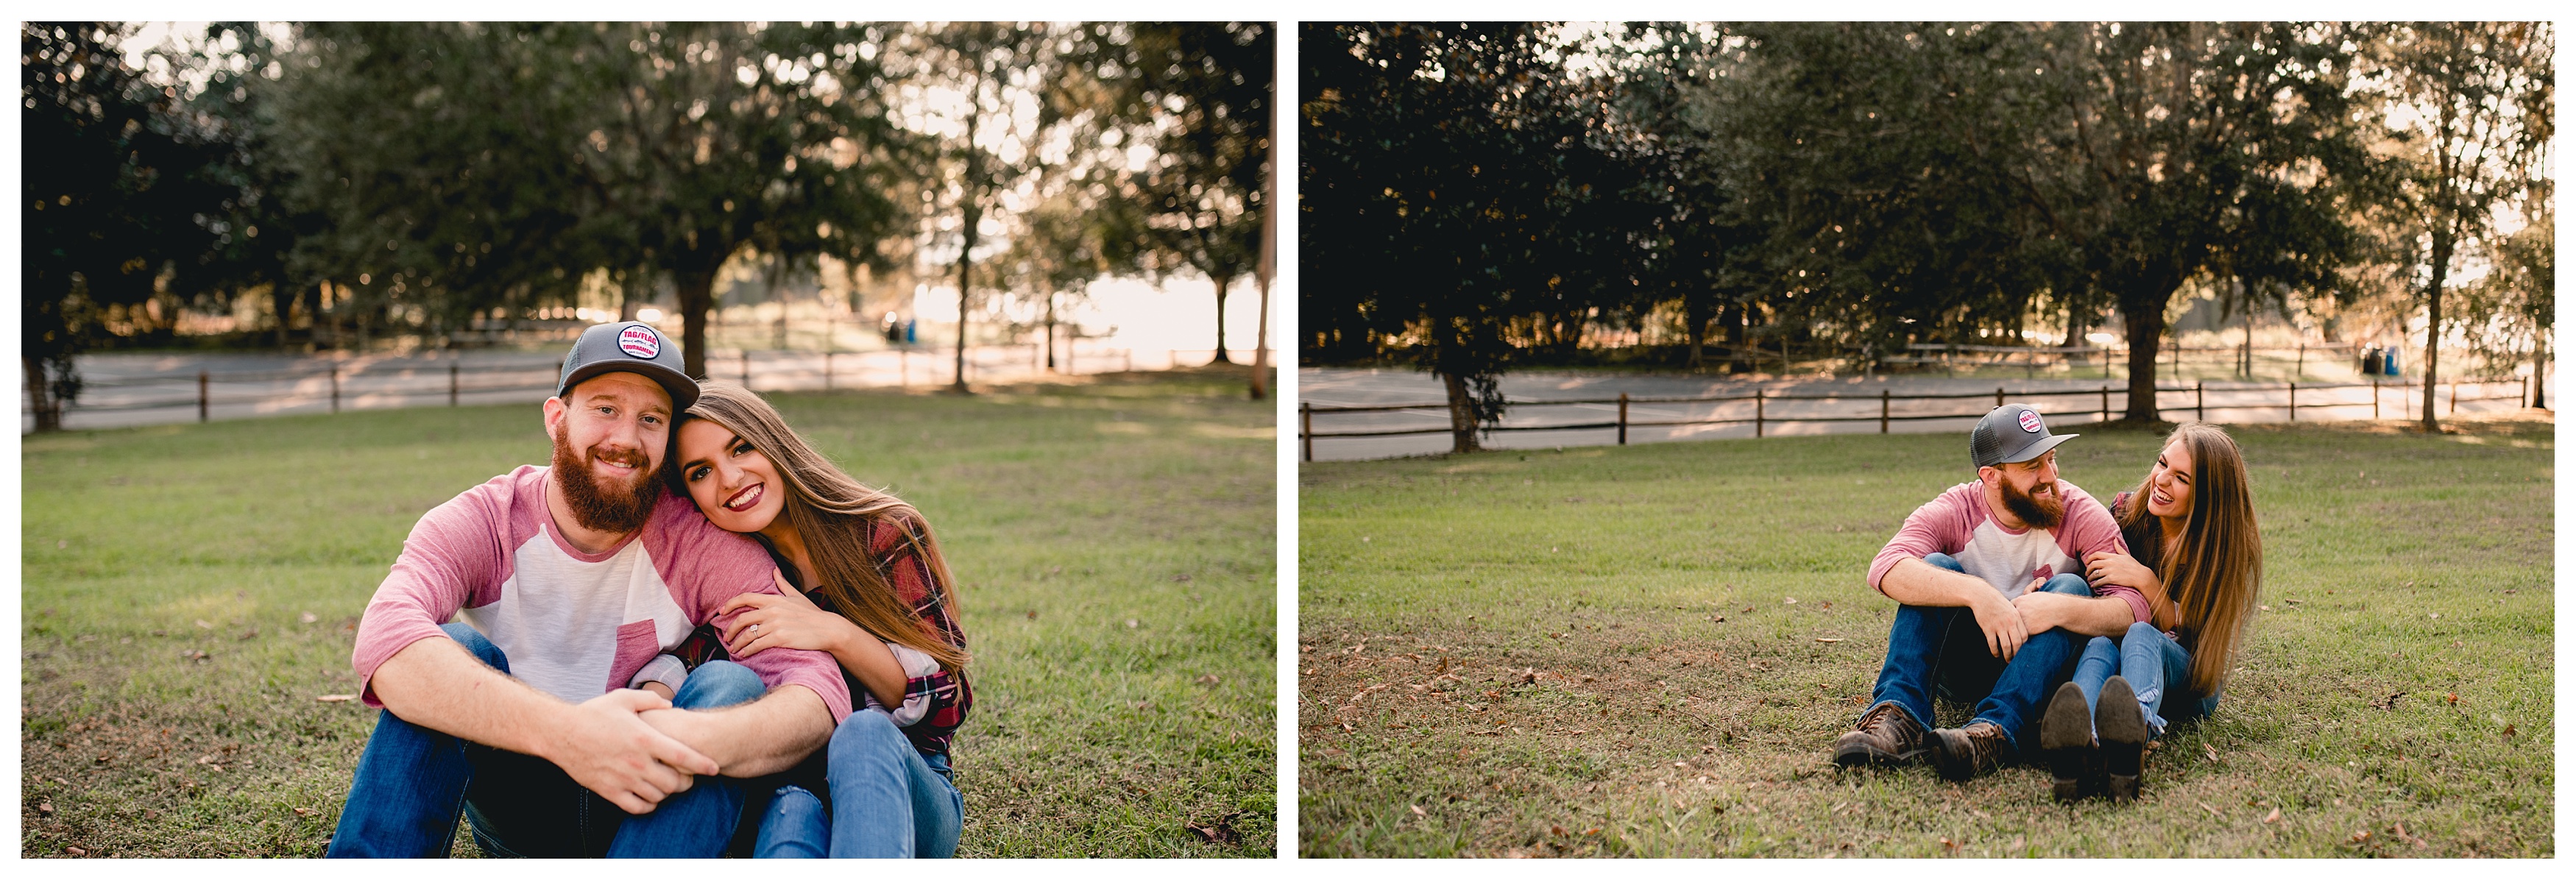 Engagement photos taken in the Monticello area of Tallahassee. Shelly Williams Photography